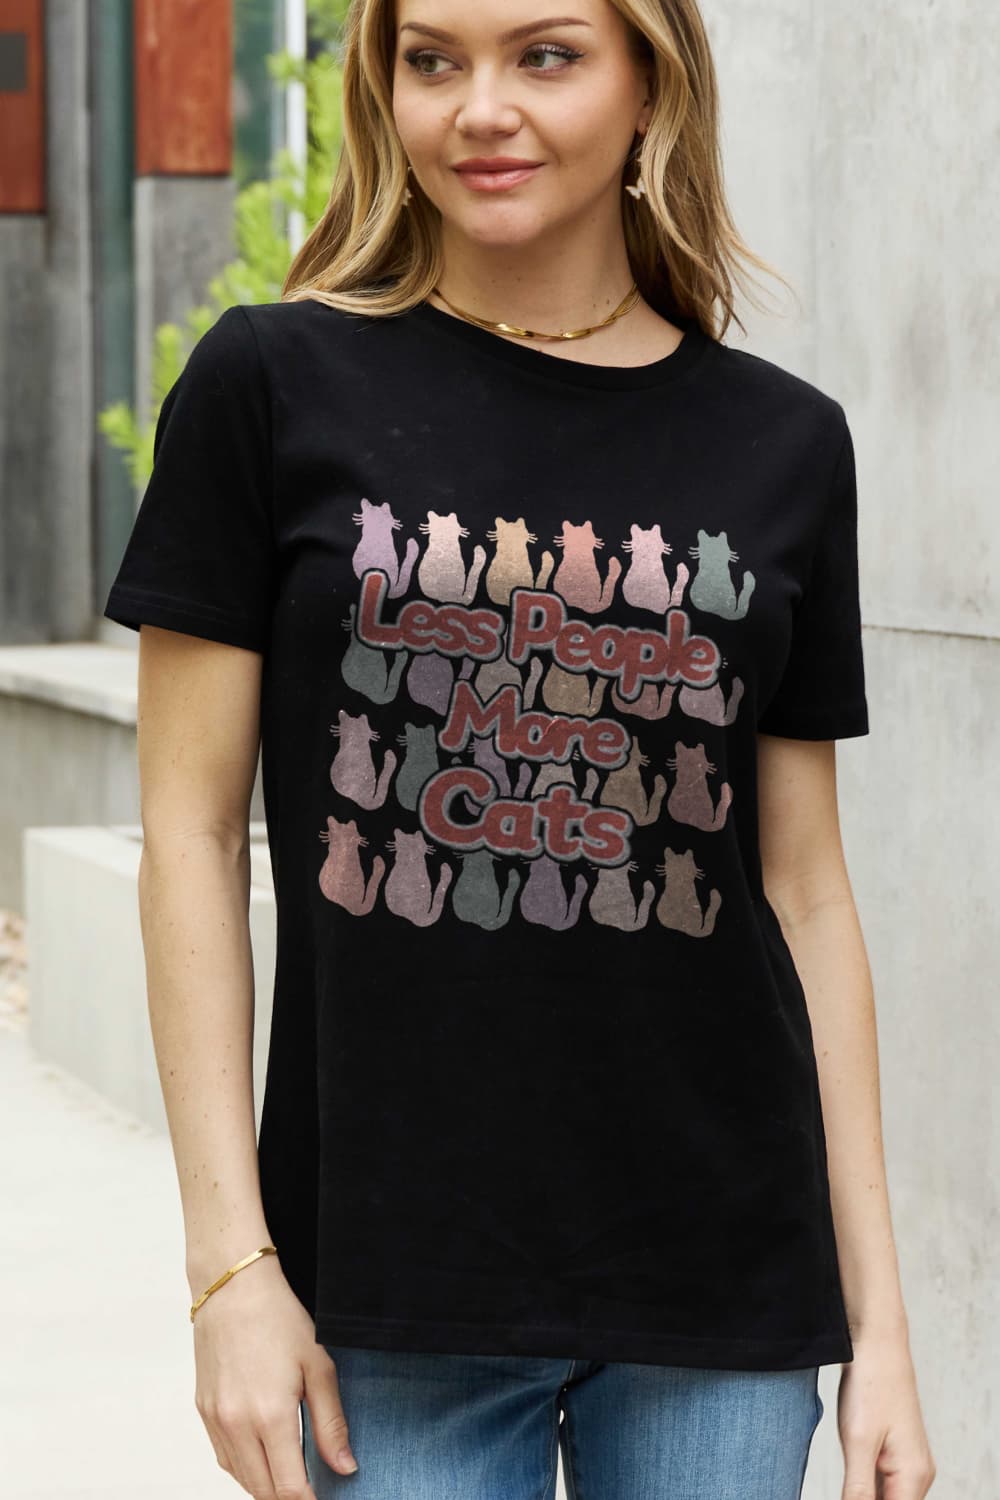 LESS PEOPLE MORE CATS Graphic Cotton Tee-Authentically Radd Women's Online Boutique in Endwell, New York